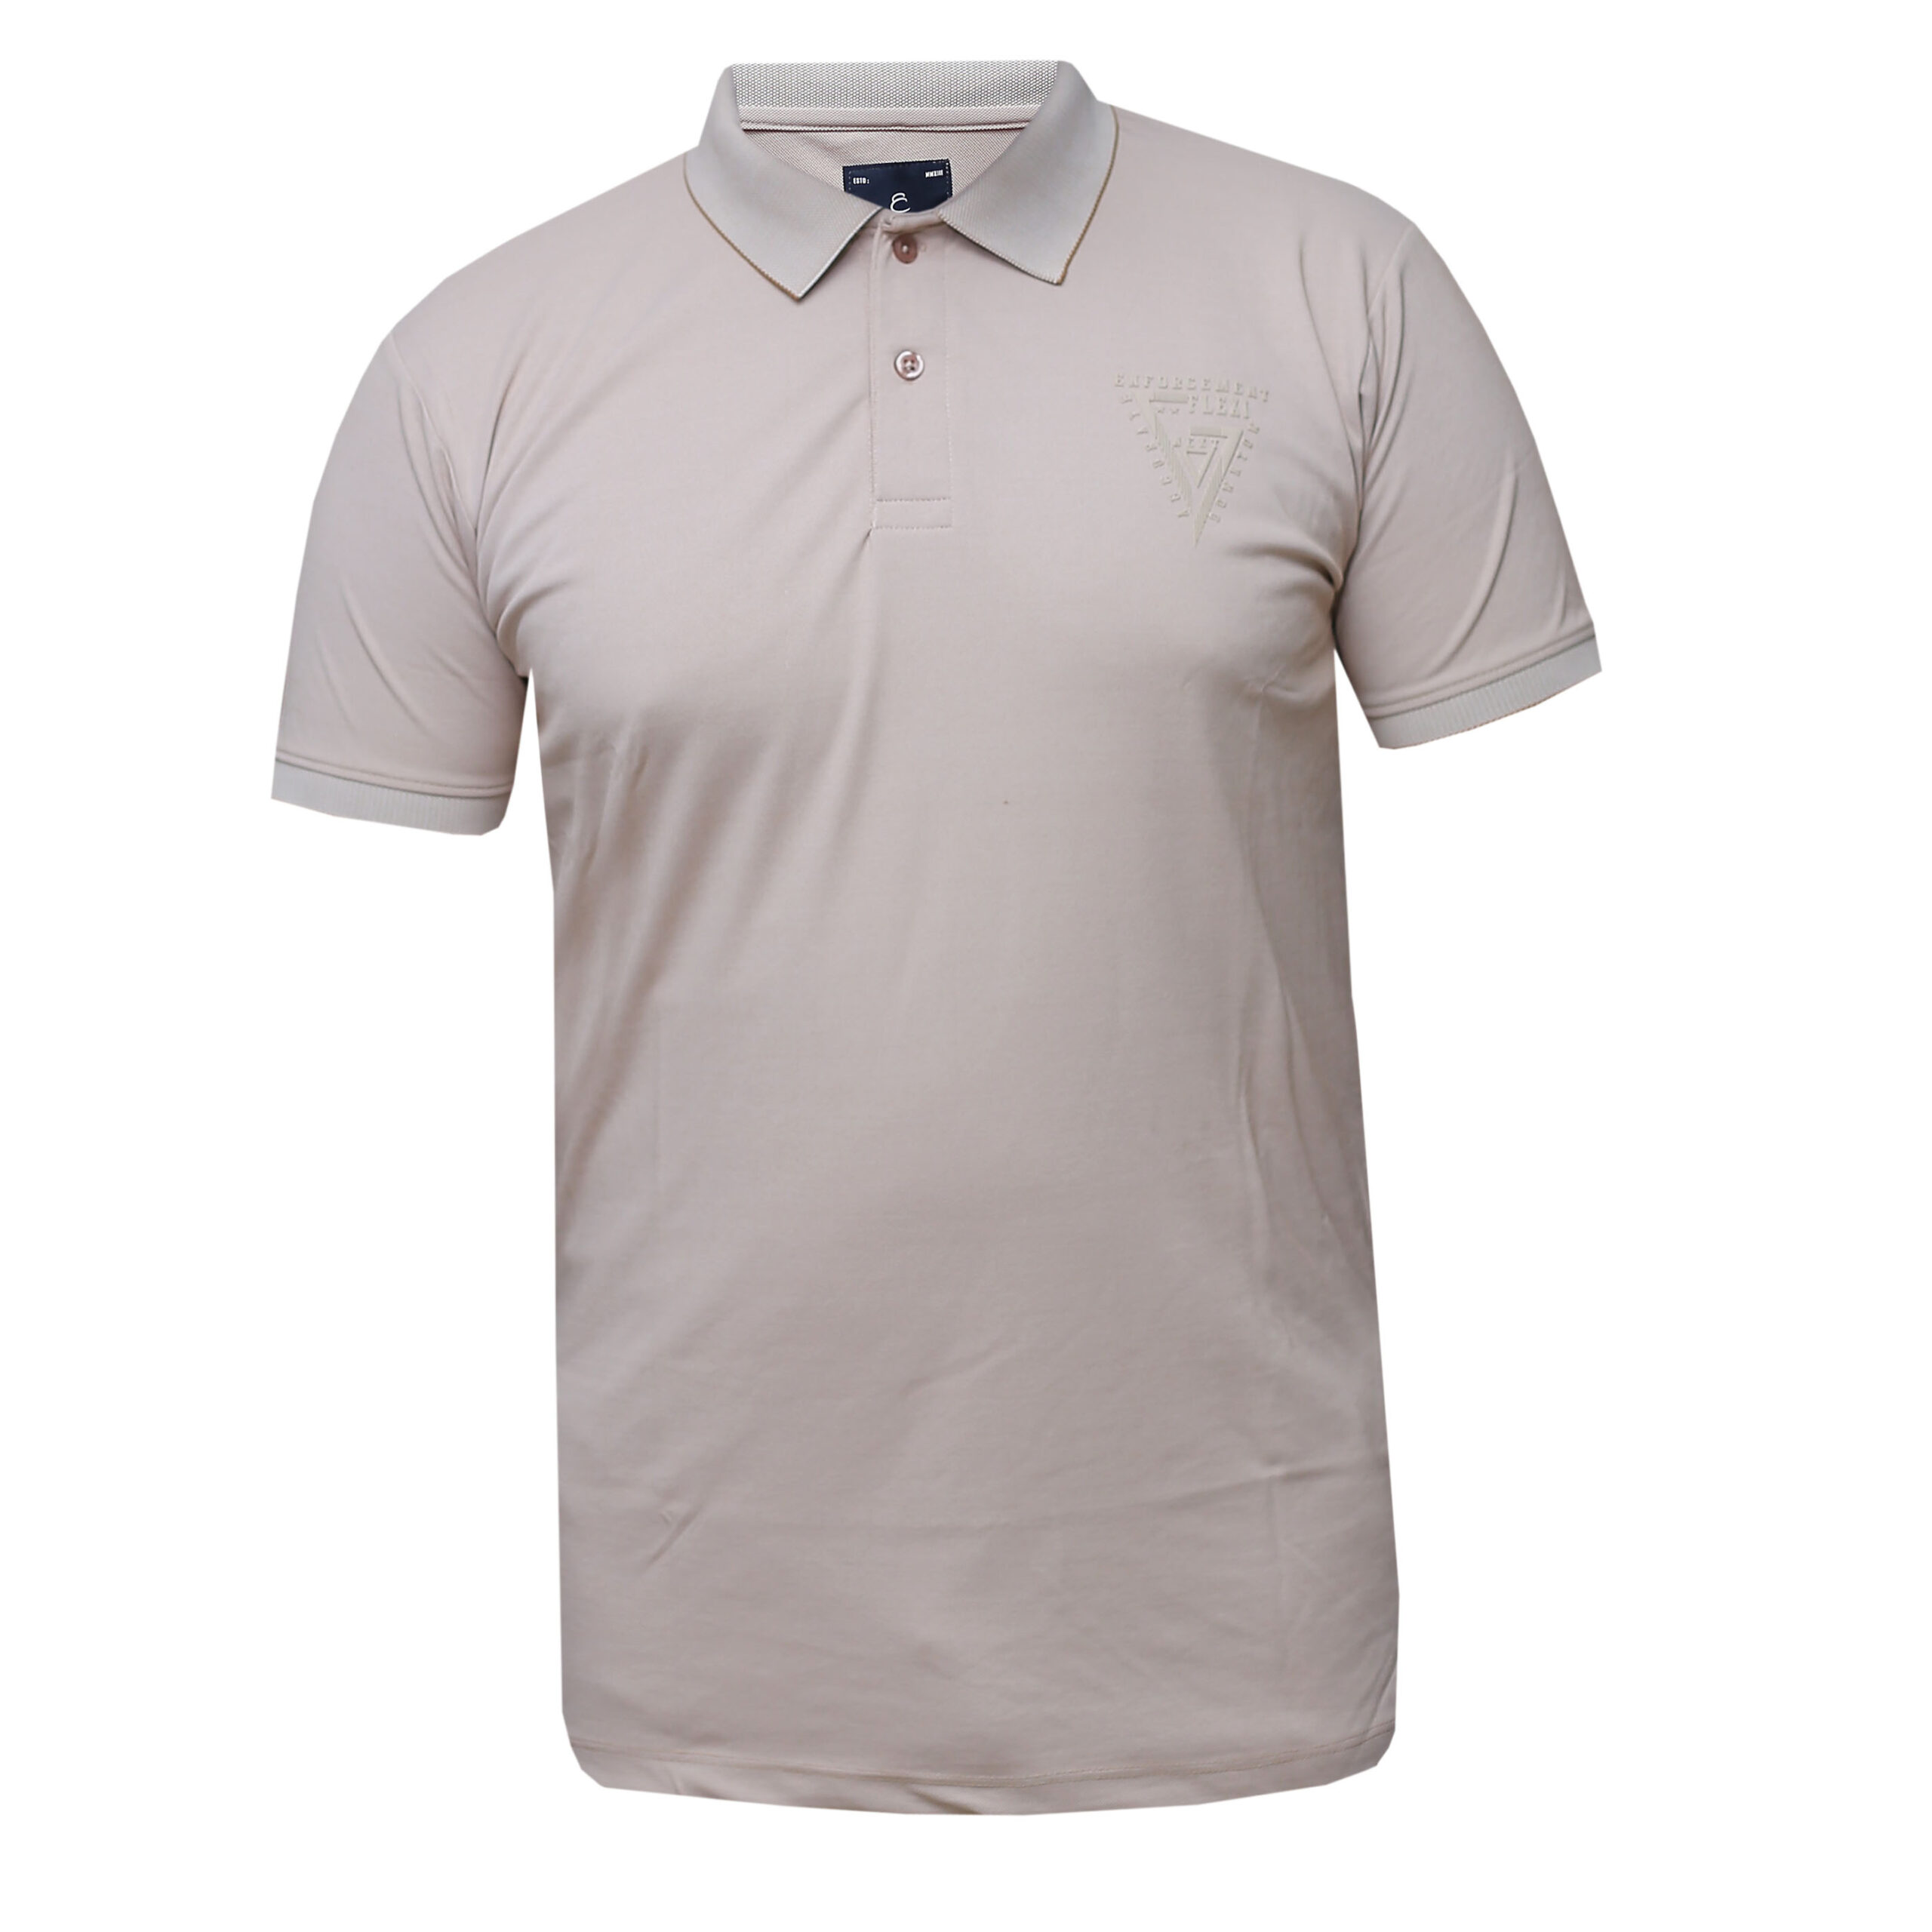 Everyday Collar T-Shirt for Men – Quality Polos for Men